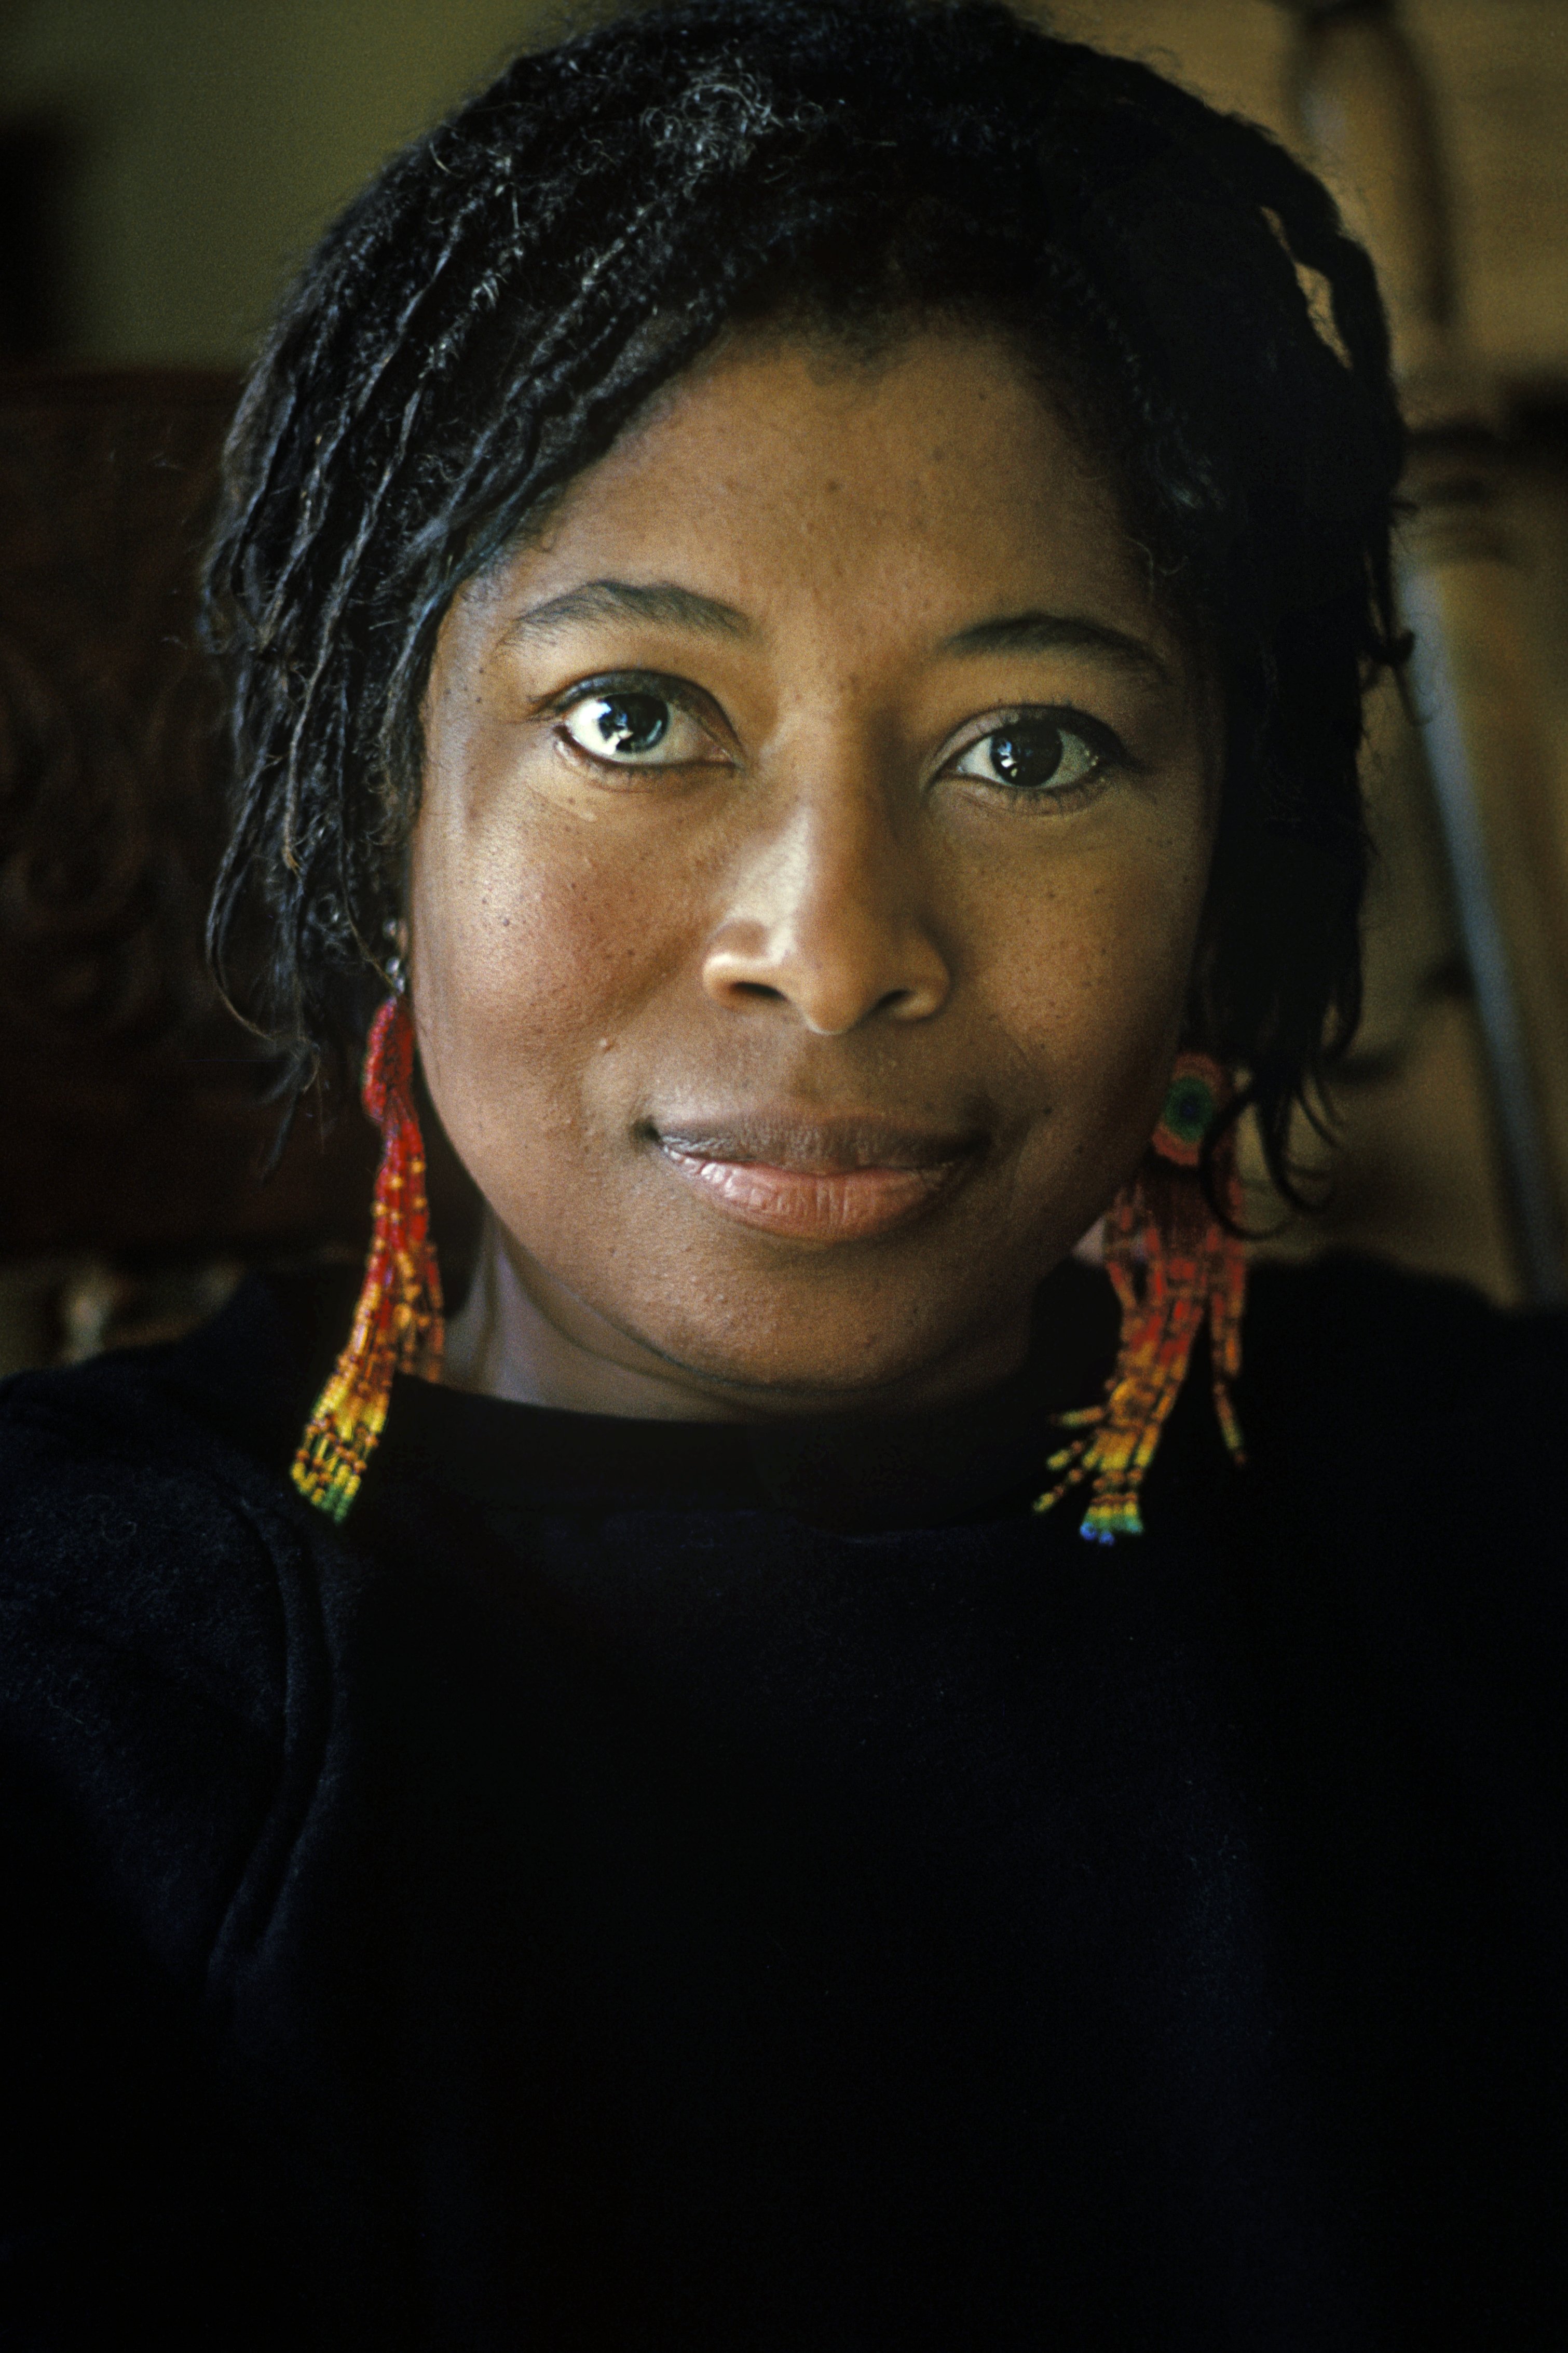 Alice Walker , Best known for her novel 'The Color Purple', poses for portrait at home in San Francisco in January, 1985. | Photo by Mikki Ansin/Getty Images